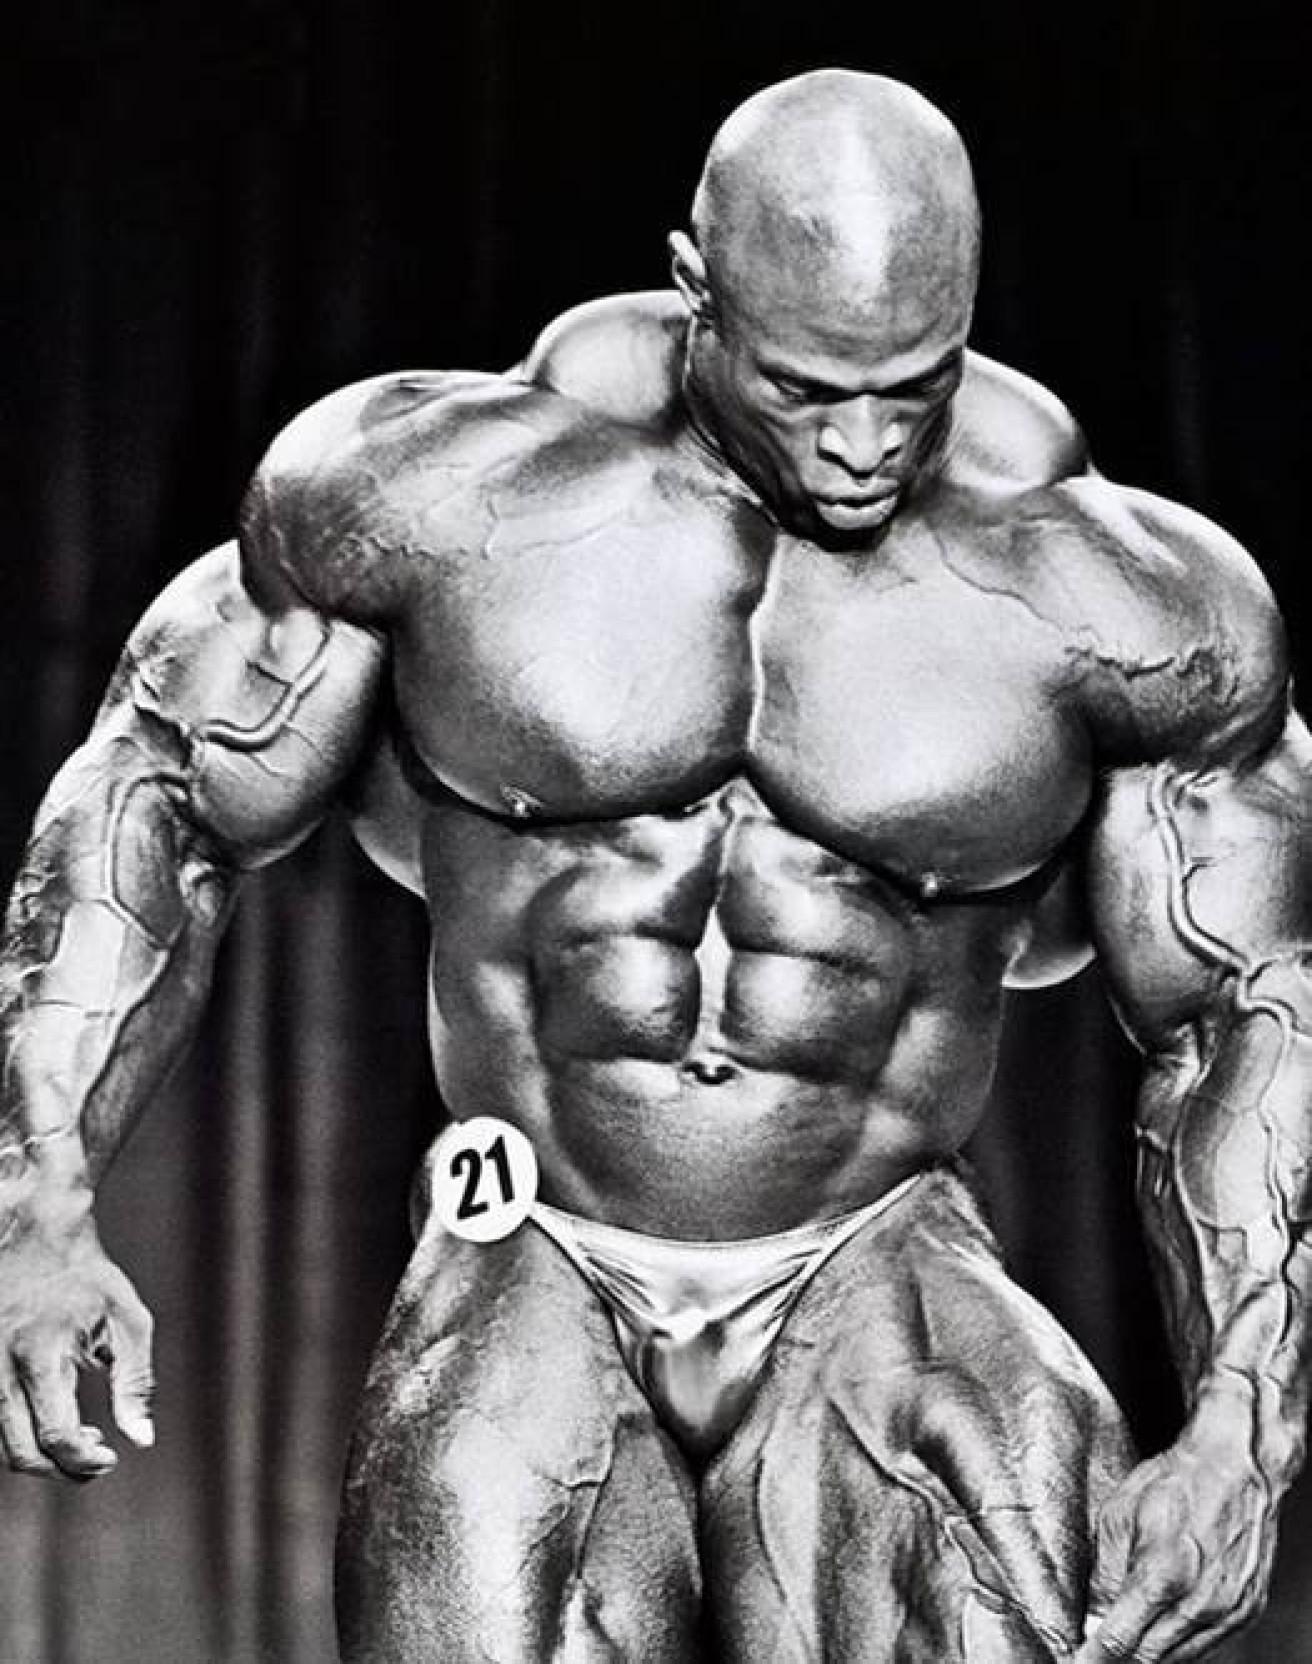 ronnie coleman BODY BUILDING POSTER HD Wallpaper Background Fine Art